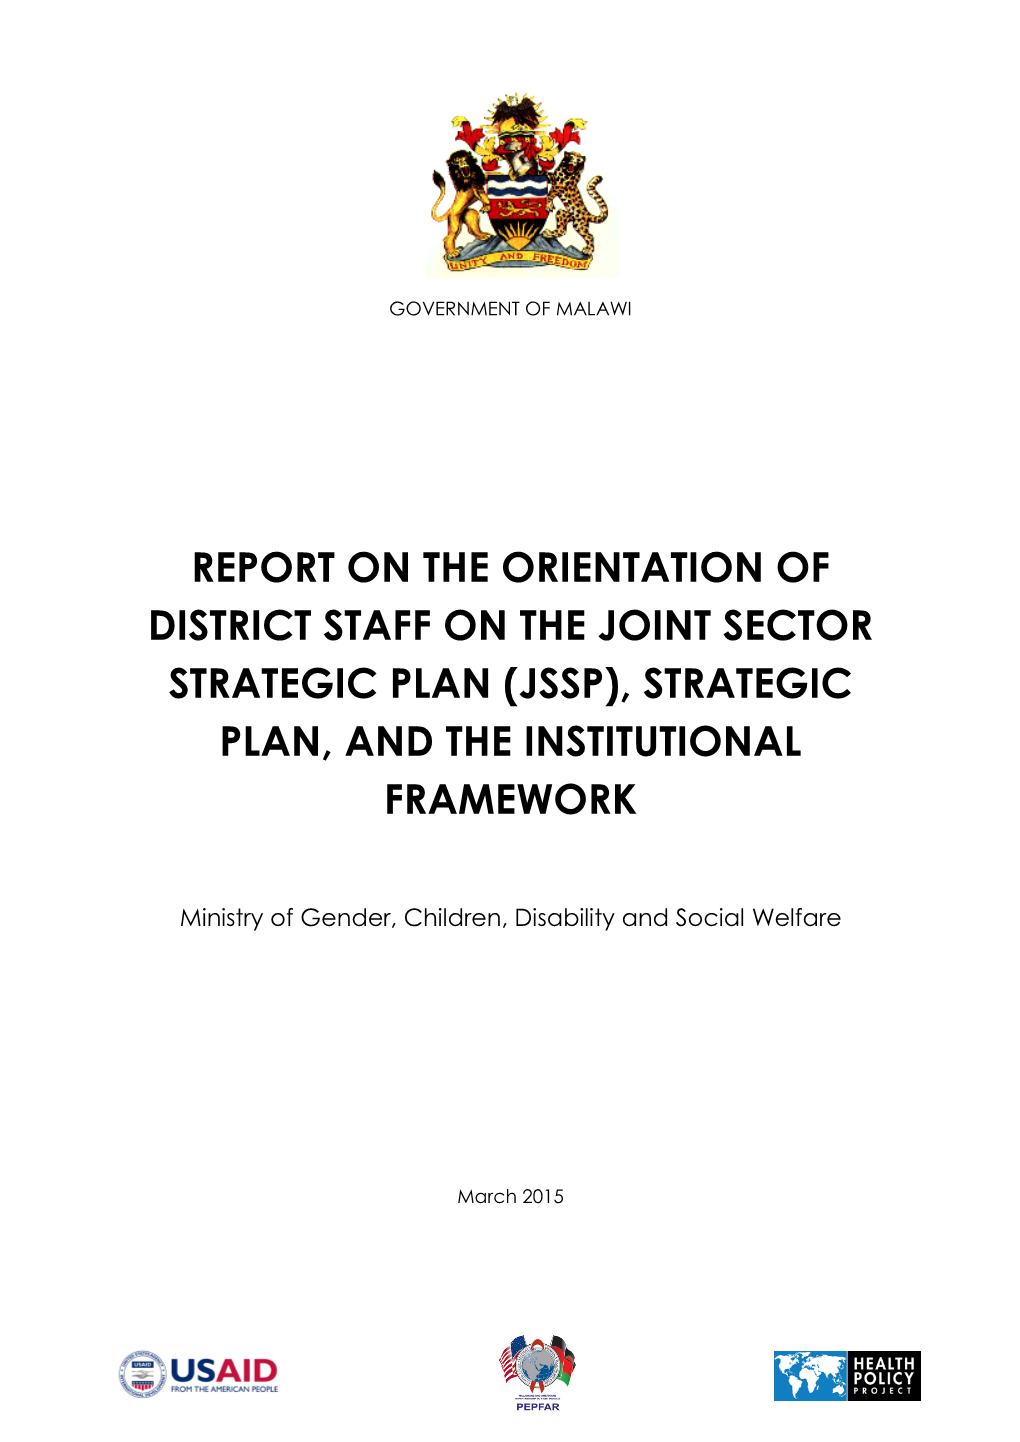 Report on the Orientation of District Staff on the Joint Sector Strategic Plan (Jssp), Strategic Plan, and the Institutional Framework